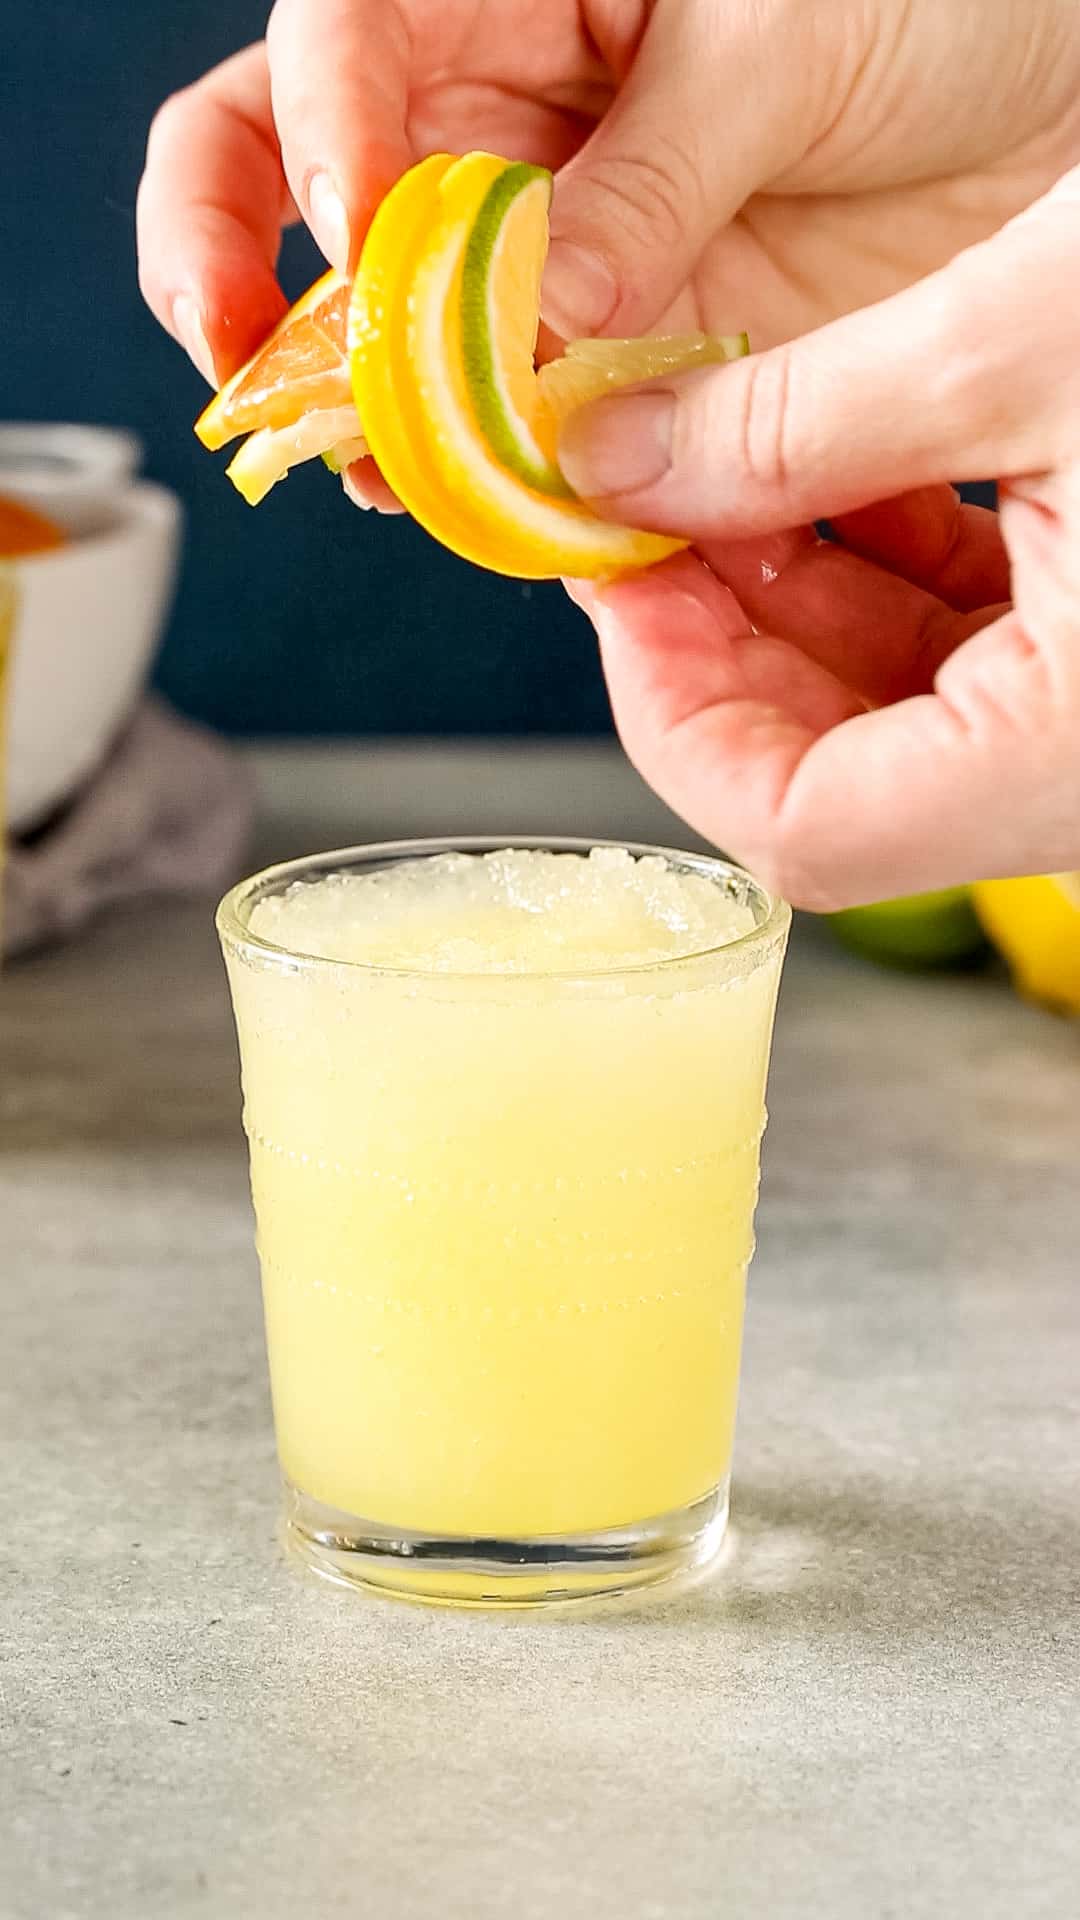 Hands twisting together citrus slices to add to the top of a yellow slush drink.